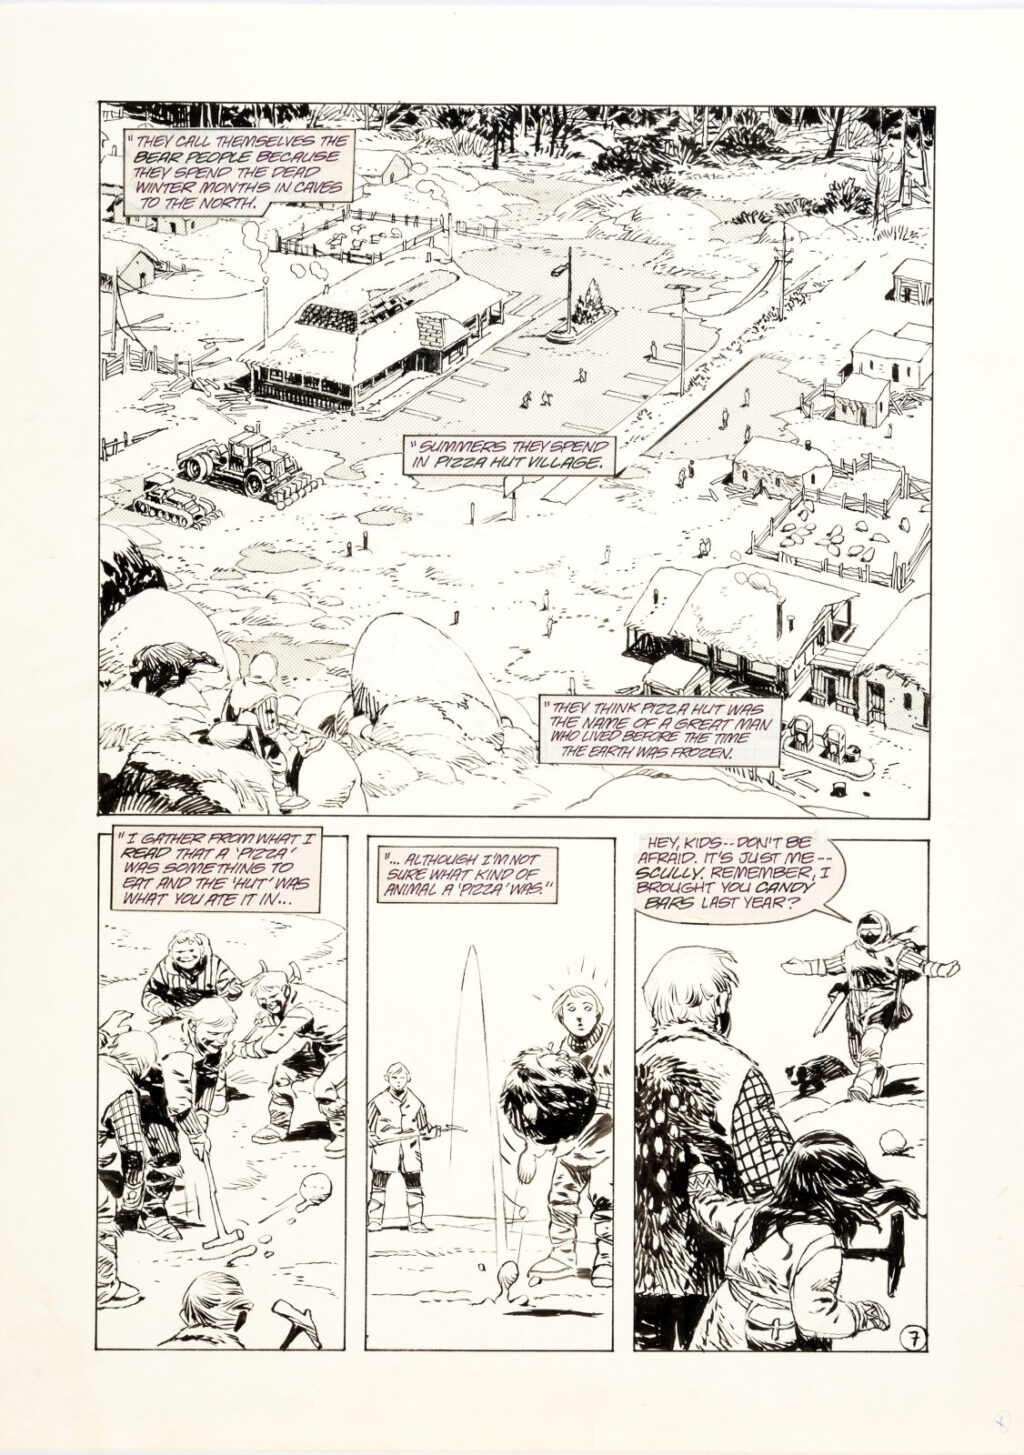 Winter World issue 2 page 7 by Jorge Zaffino